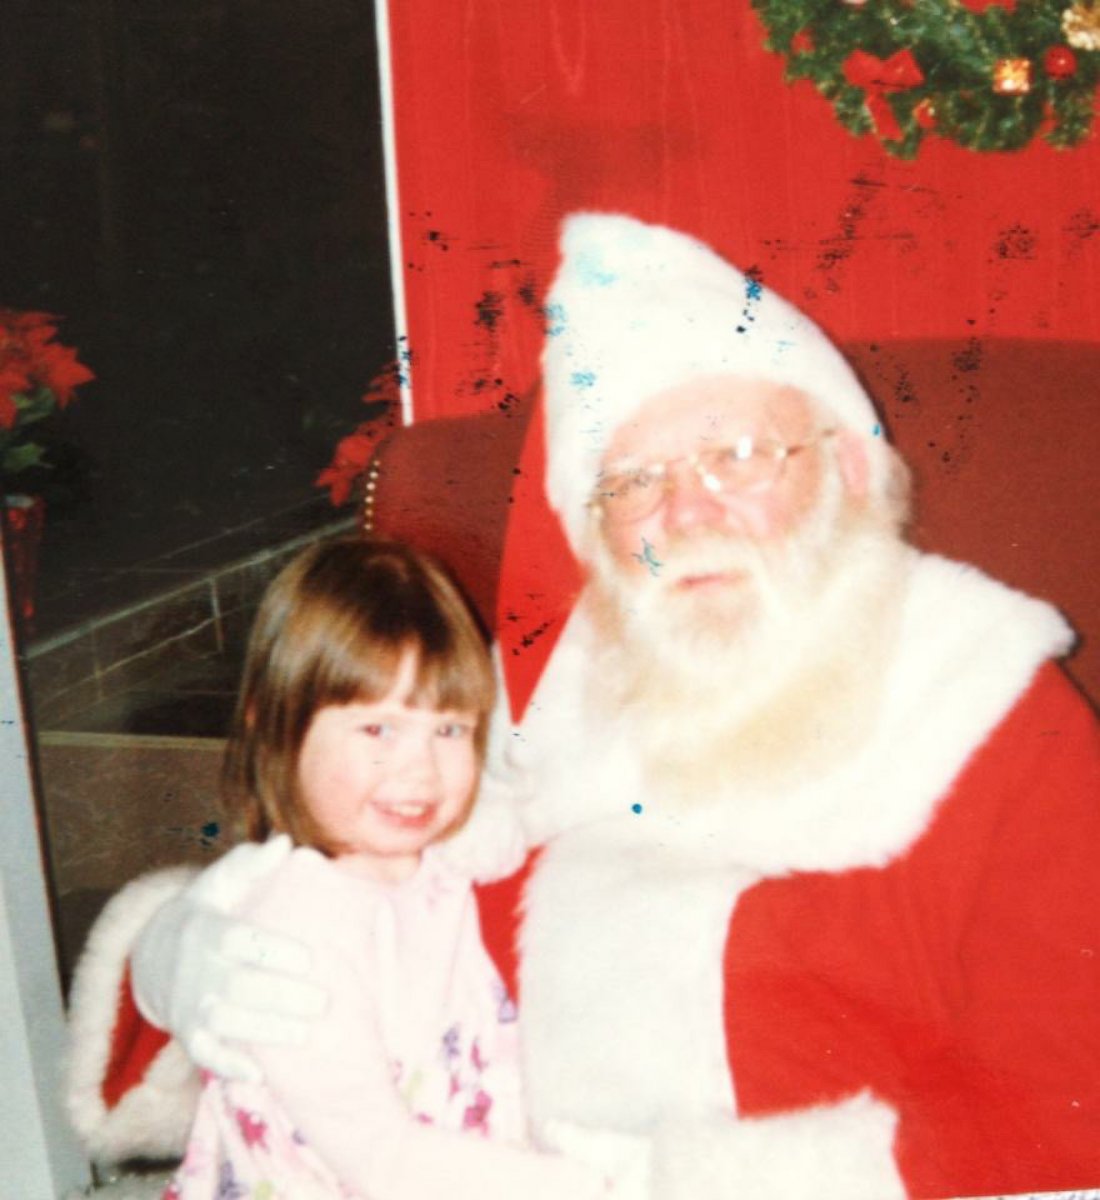 PHOTO: McKenzie Doig photographed with Santa Claus at age 3 at ShoppingTown Mall in Syracuse, New York. 